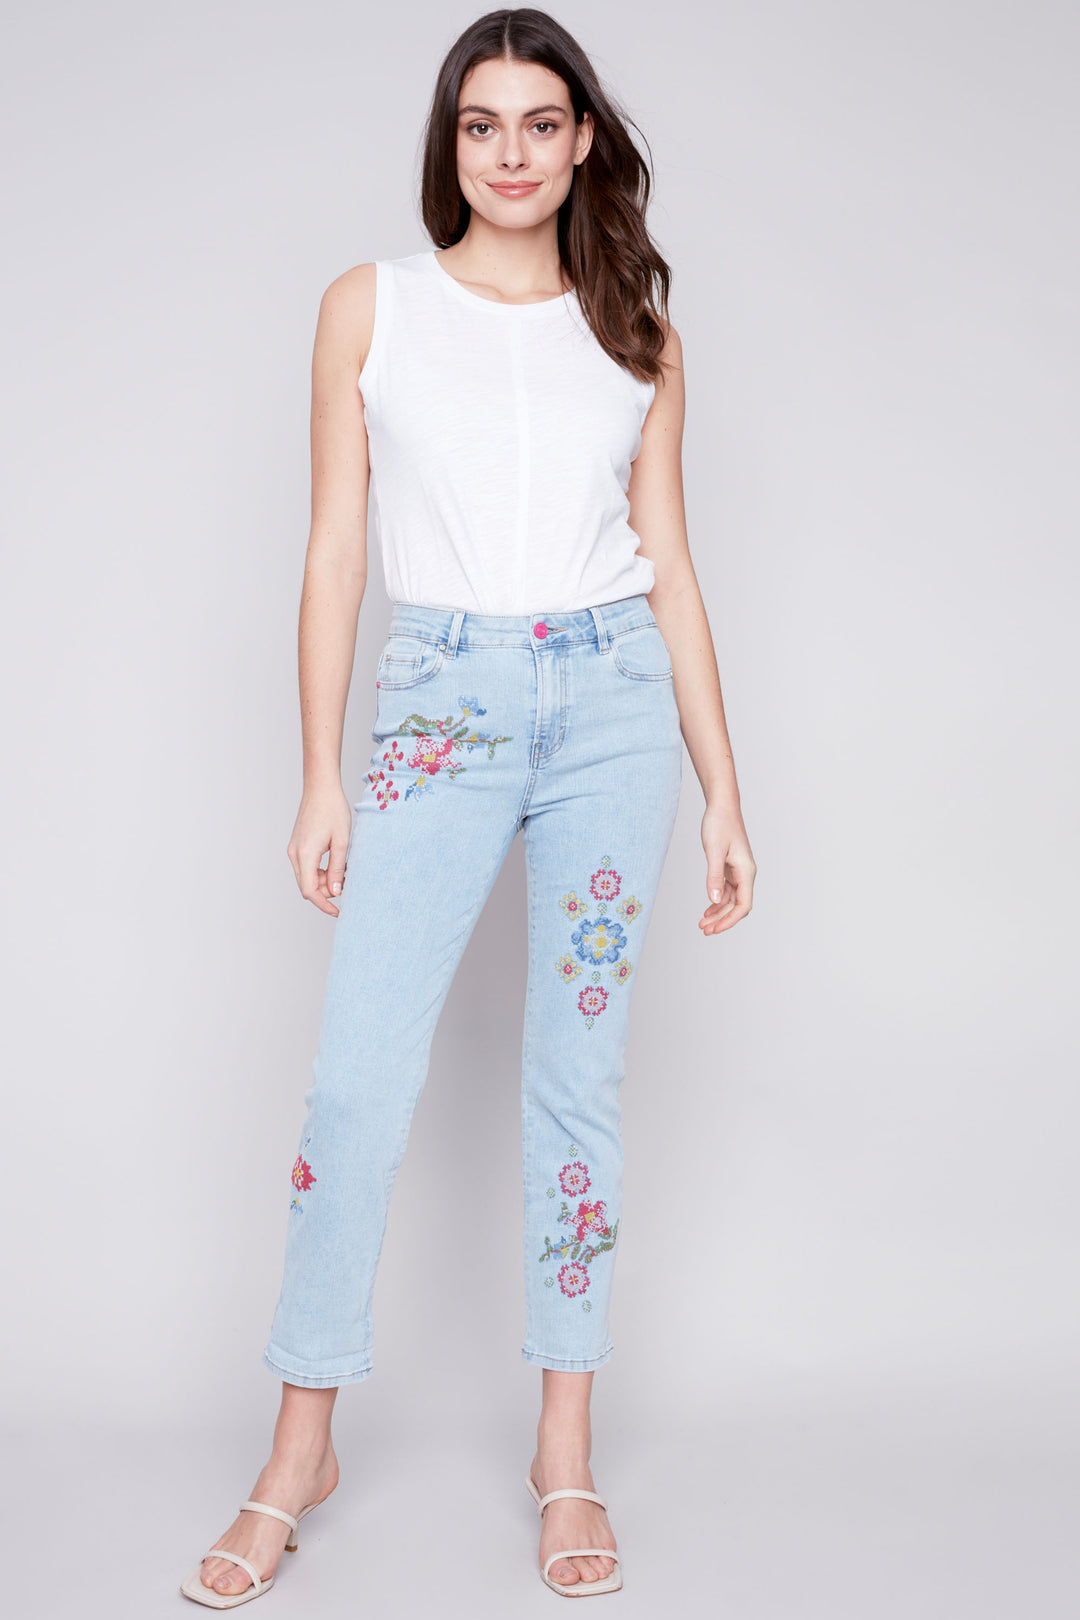 Expertly crafted with a classic 5 pocket design, these jeans feature a beautiful floral pattern with cross stitch embroidery. 